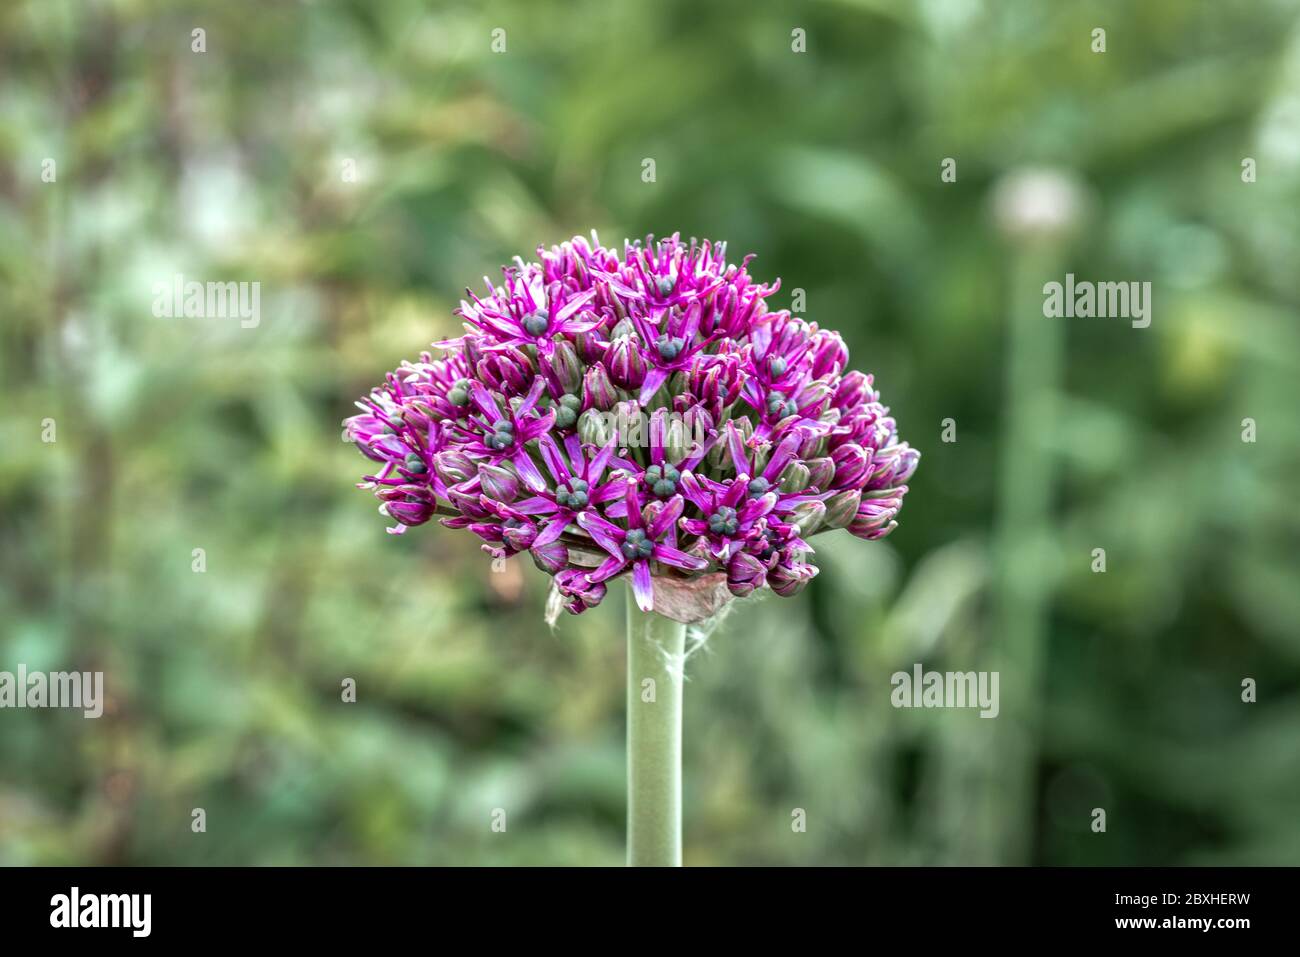 Close up of a half open bud of purple onion flower (allium) isolated in front of a green bokeh background Stock Photo